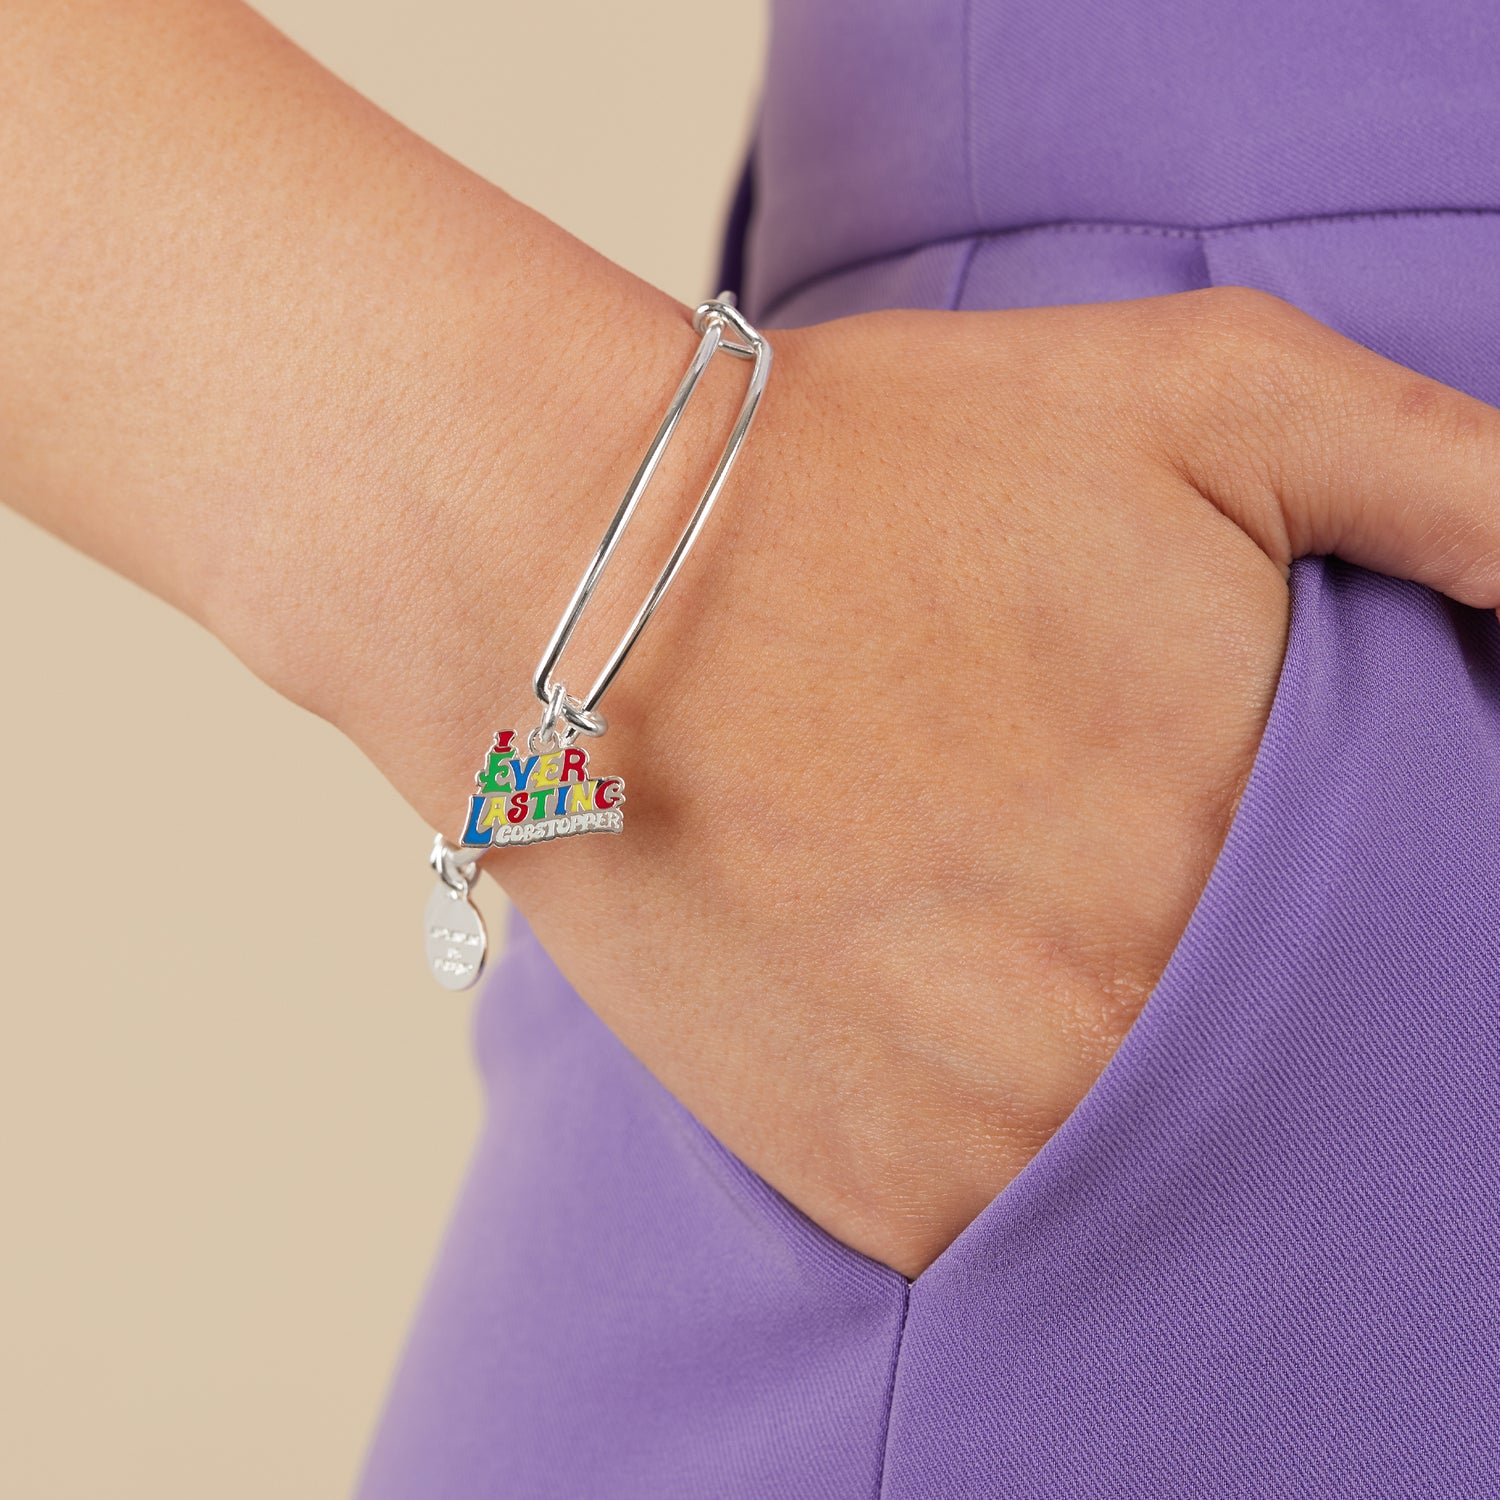 Willy Wonka 'Ever Lasting Gobstopper' Charm Bangle